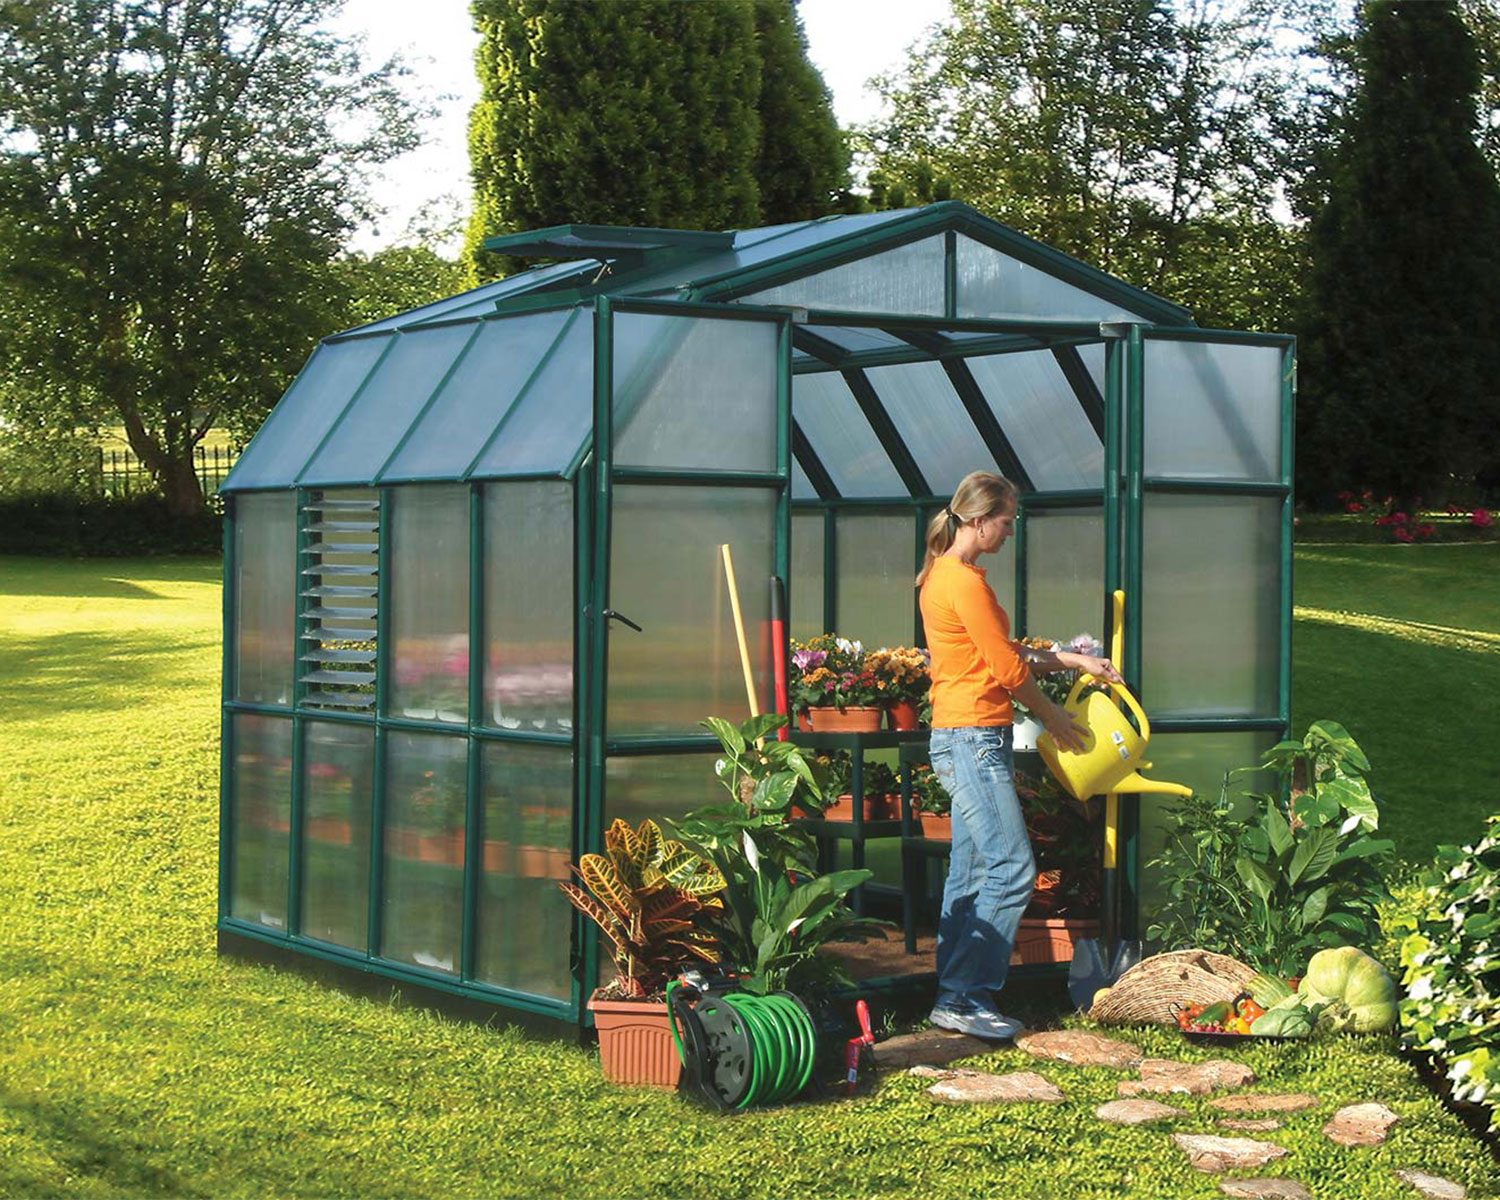 Prestige 8 ft. x 8 ft. Greenhouse Green Structure & Twin Wall Panels growing plants